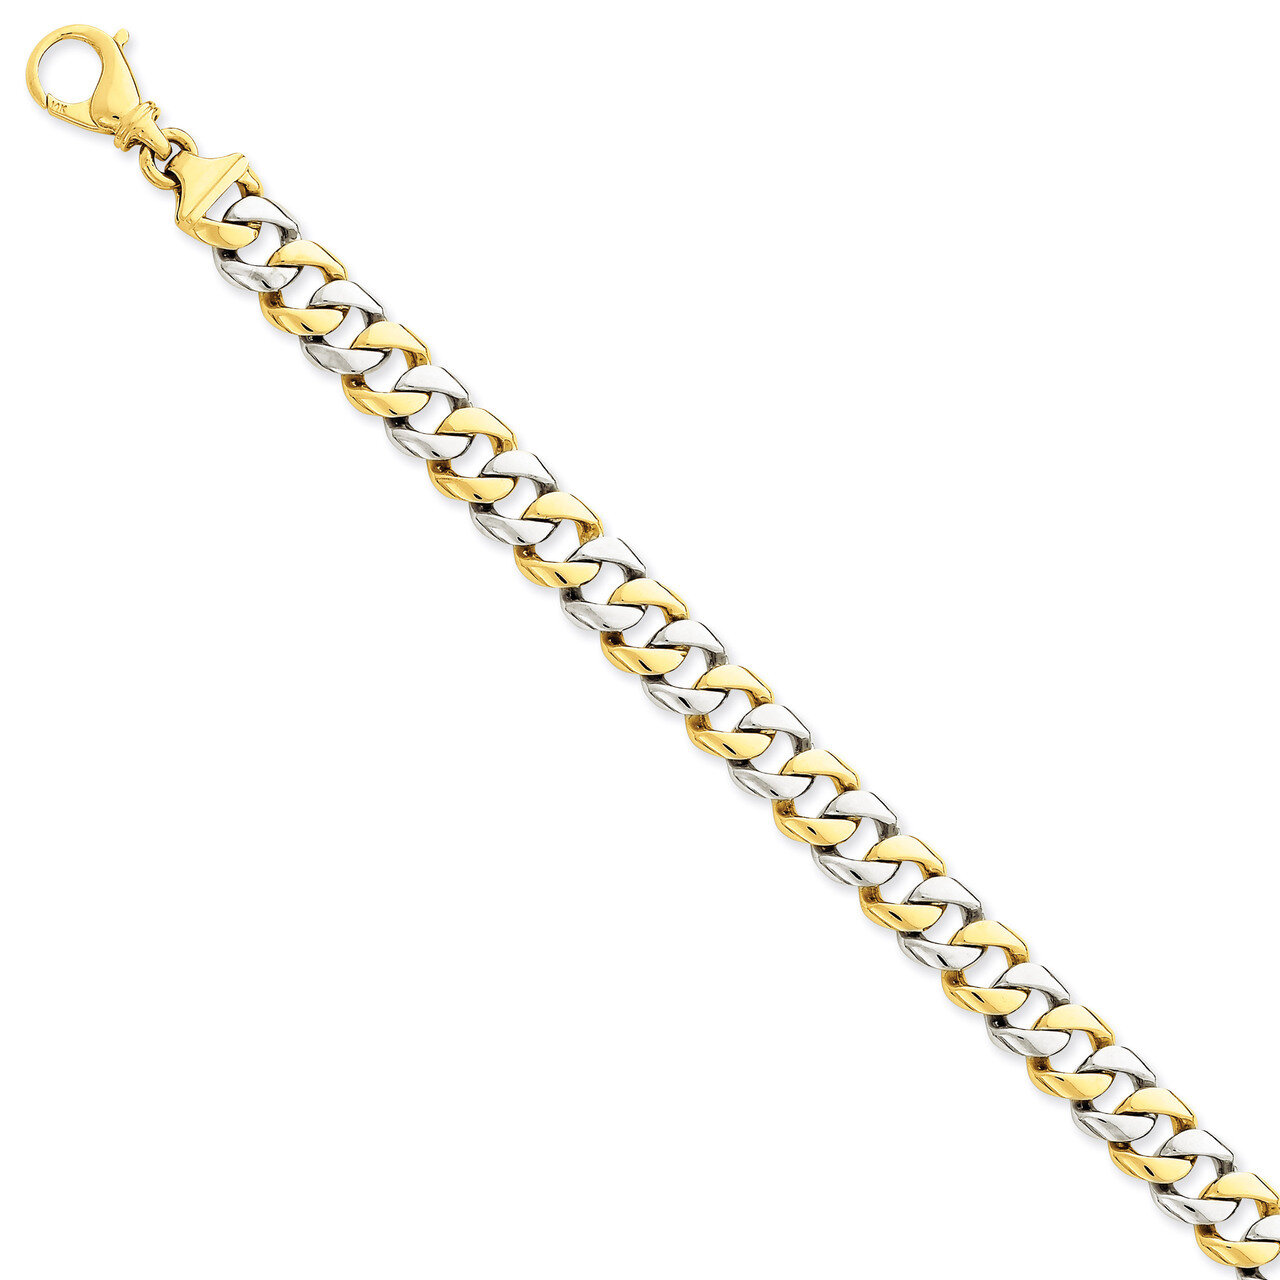 9.6mm Polished Fancy Link Chain 9 Inch 14k Two-Tone Gold LK512-9